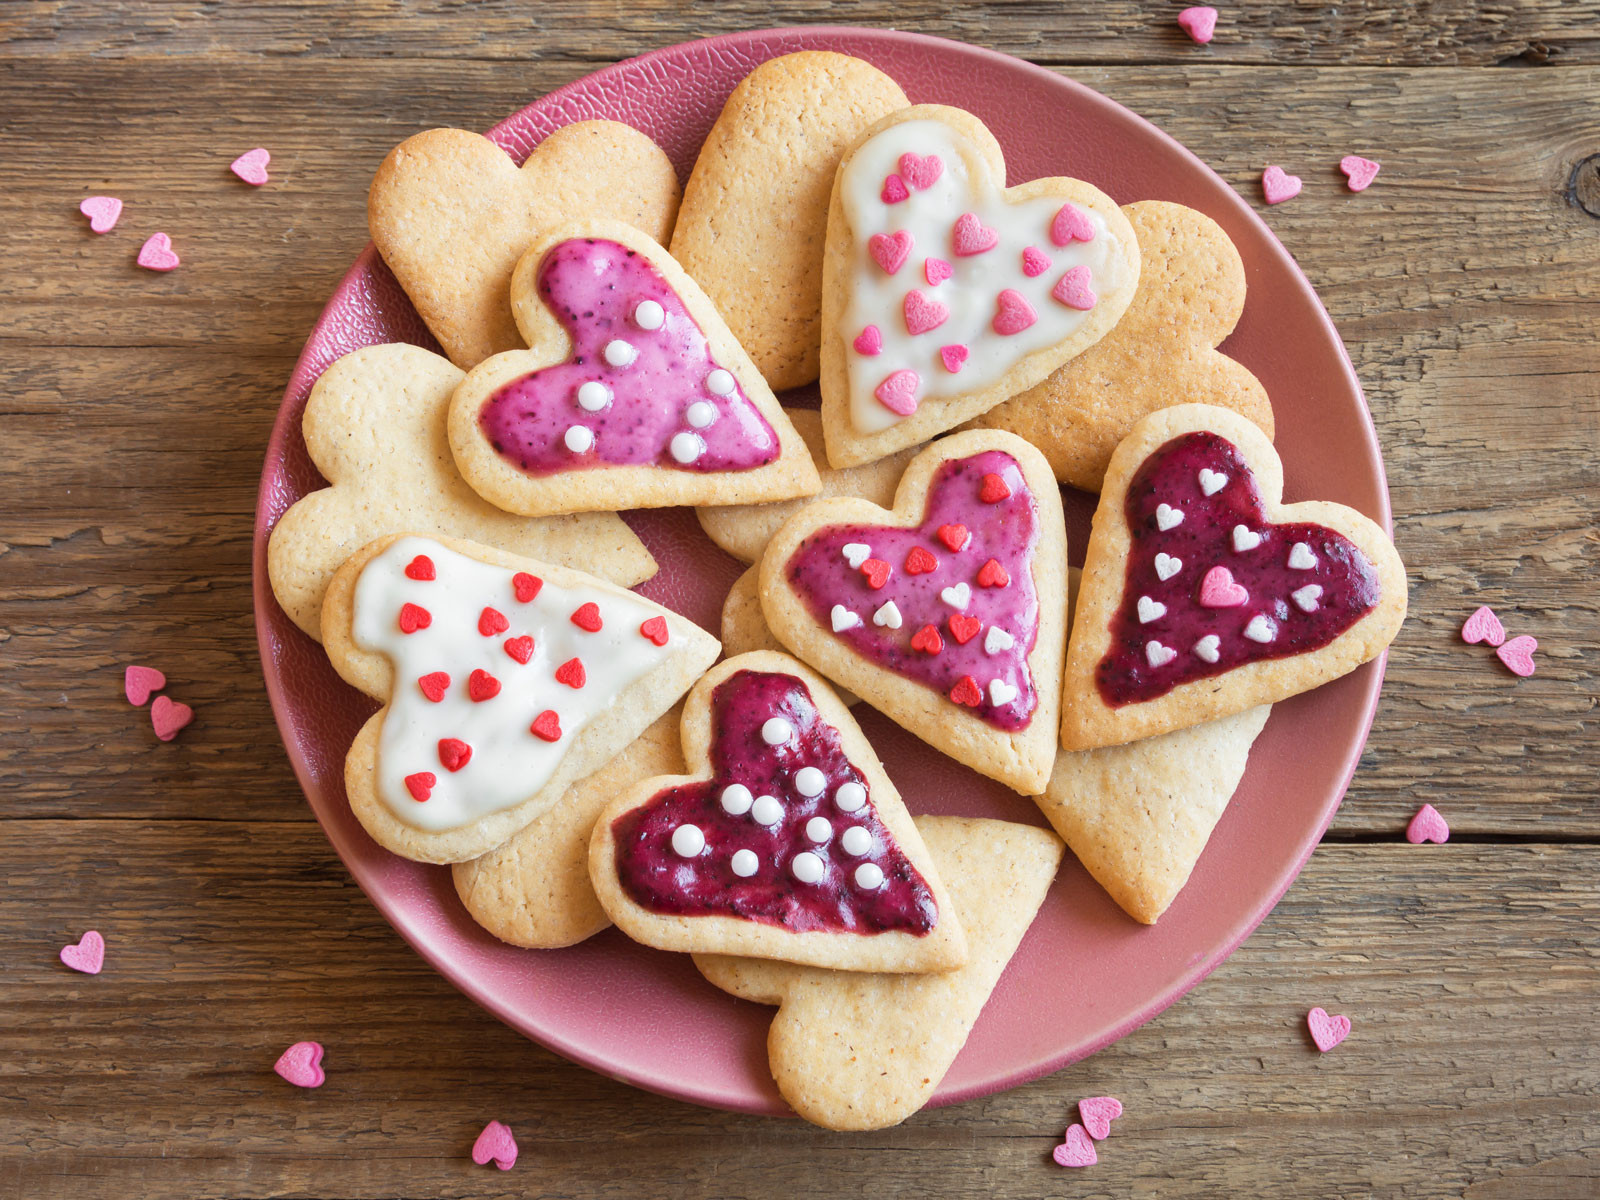 Valentines Day Food Deals
 Valentine’s Day Deals Where to Find Free Food and Other